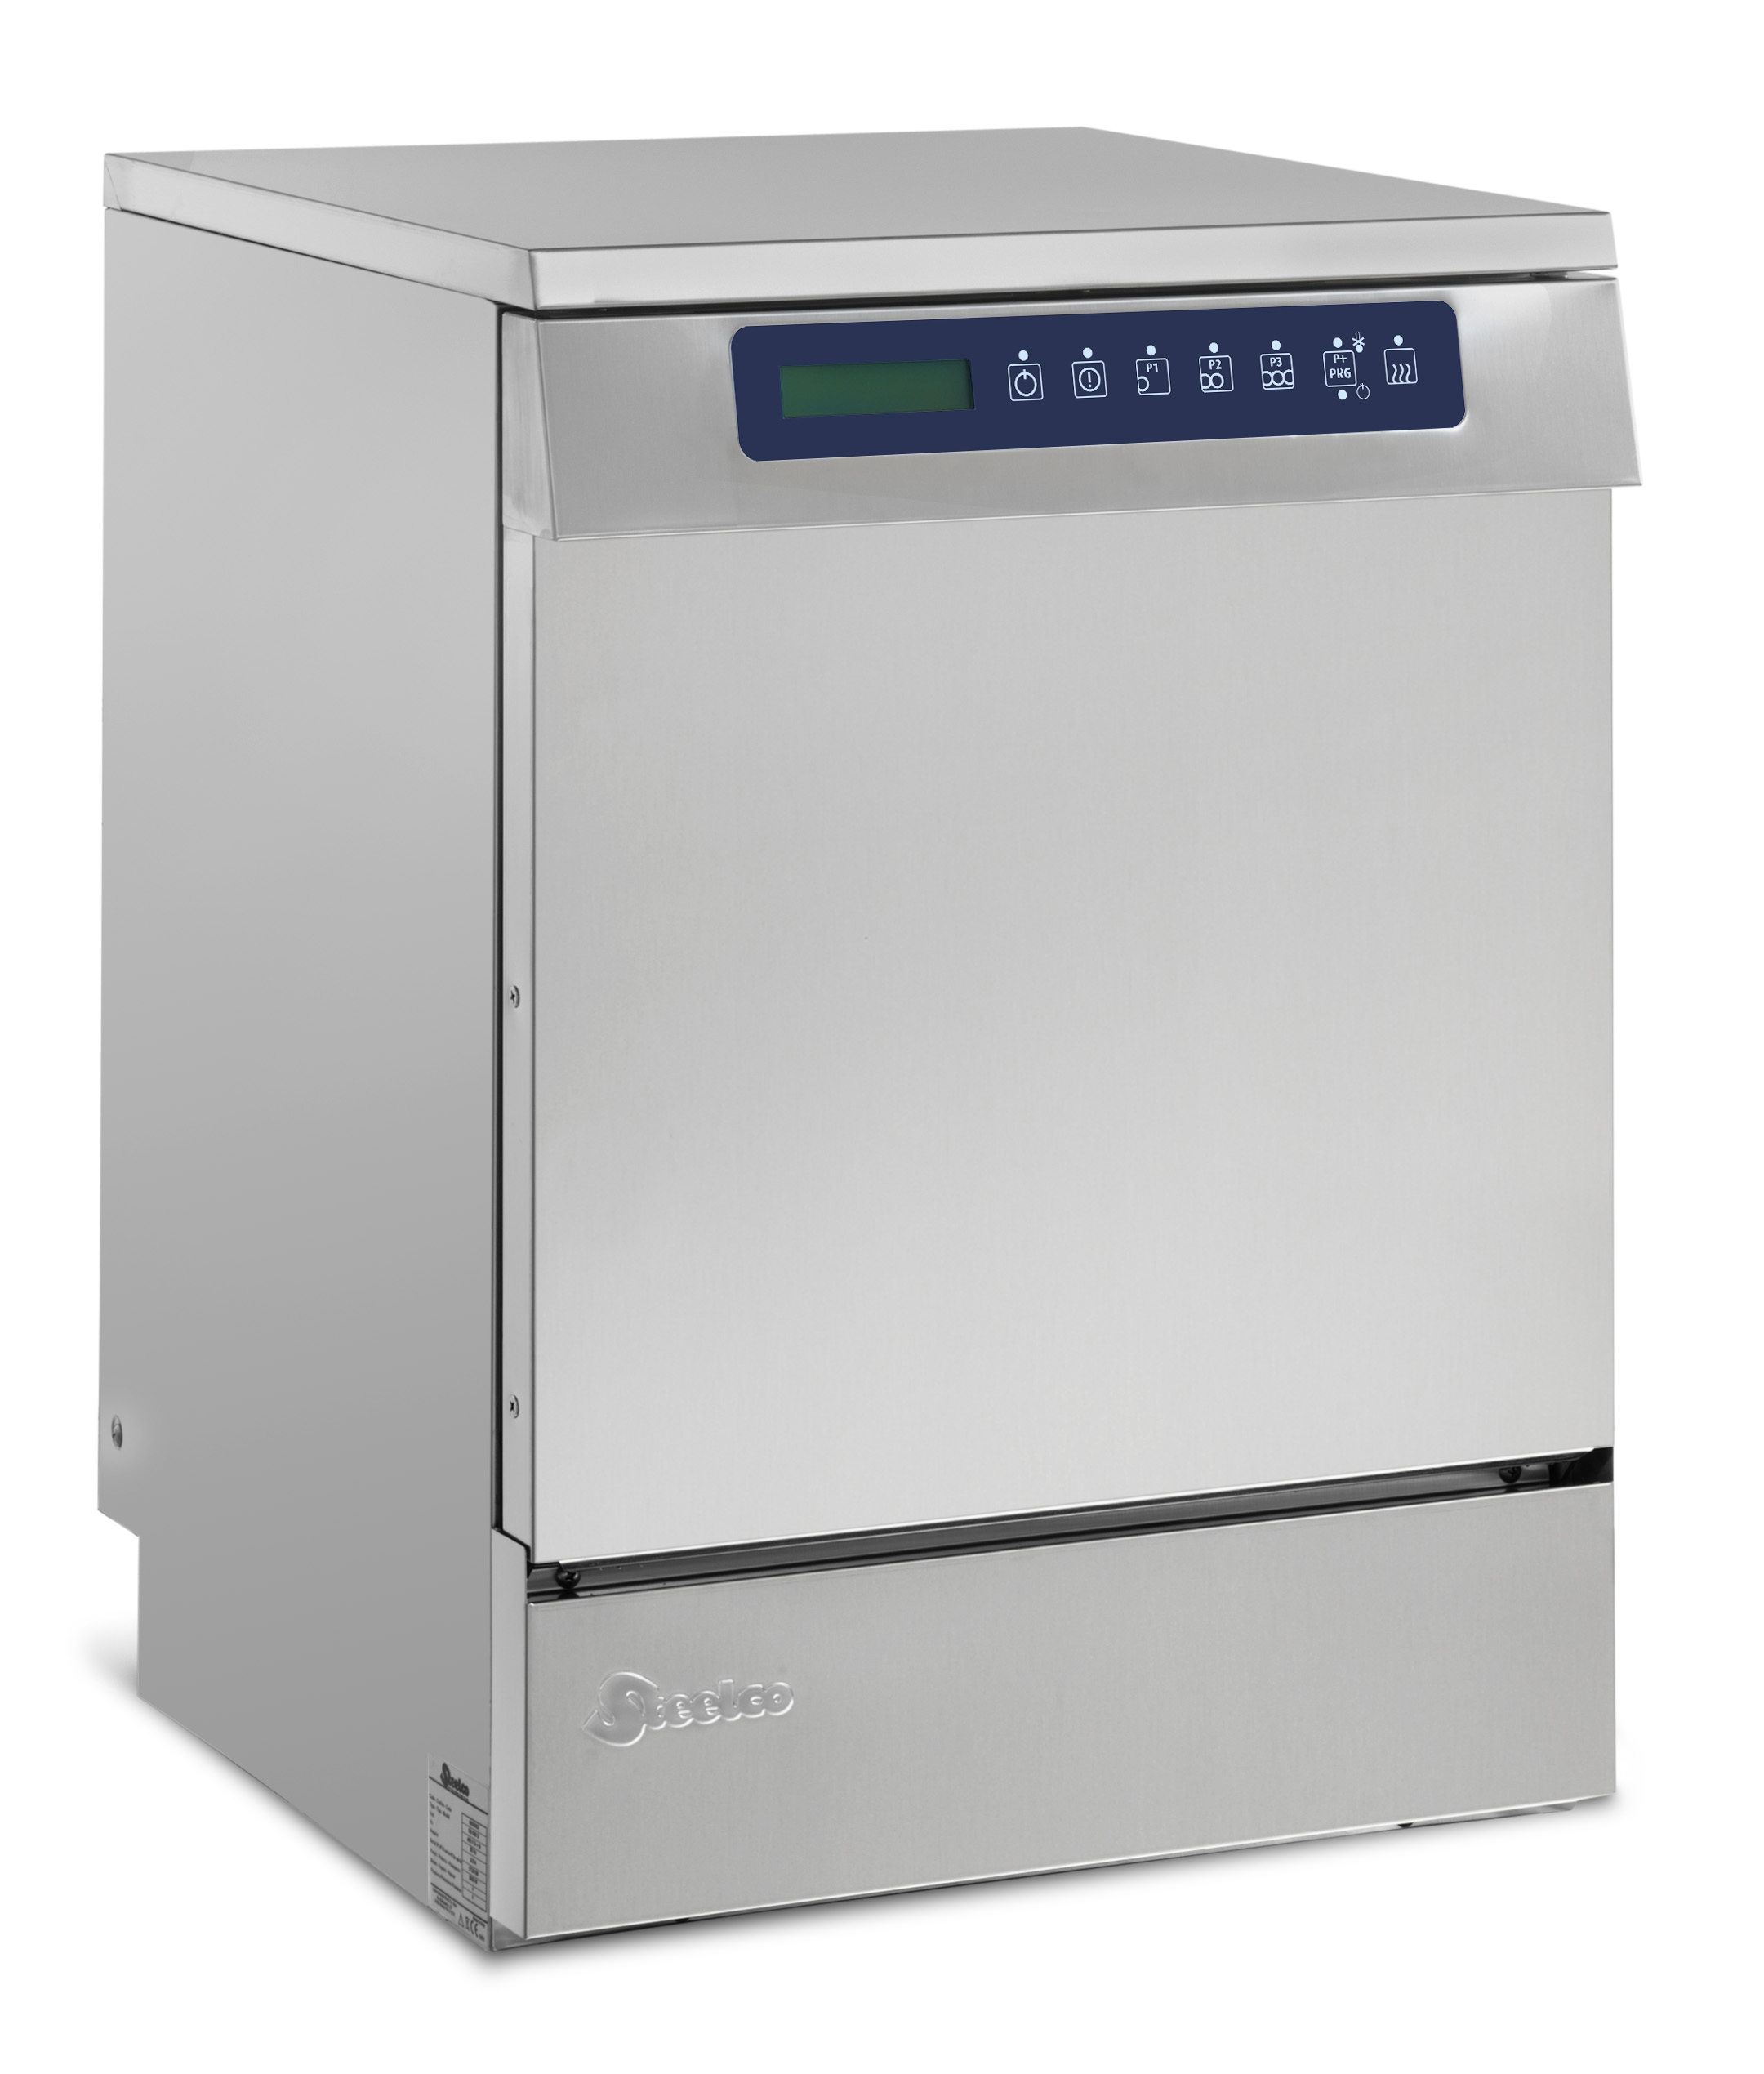 Steelco LAB 500 CL